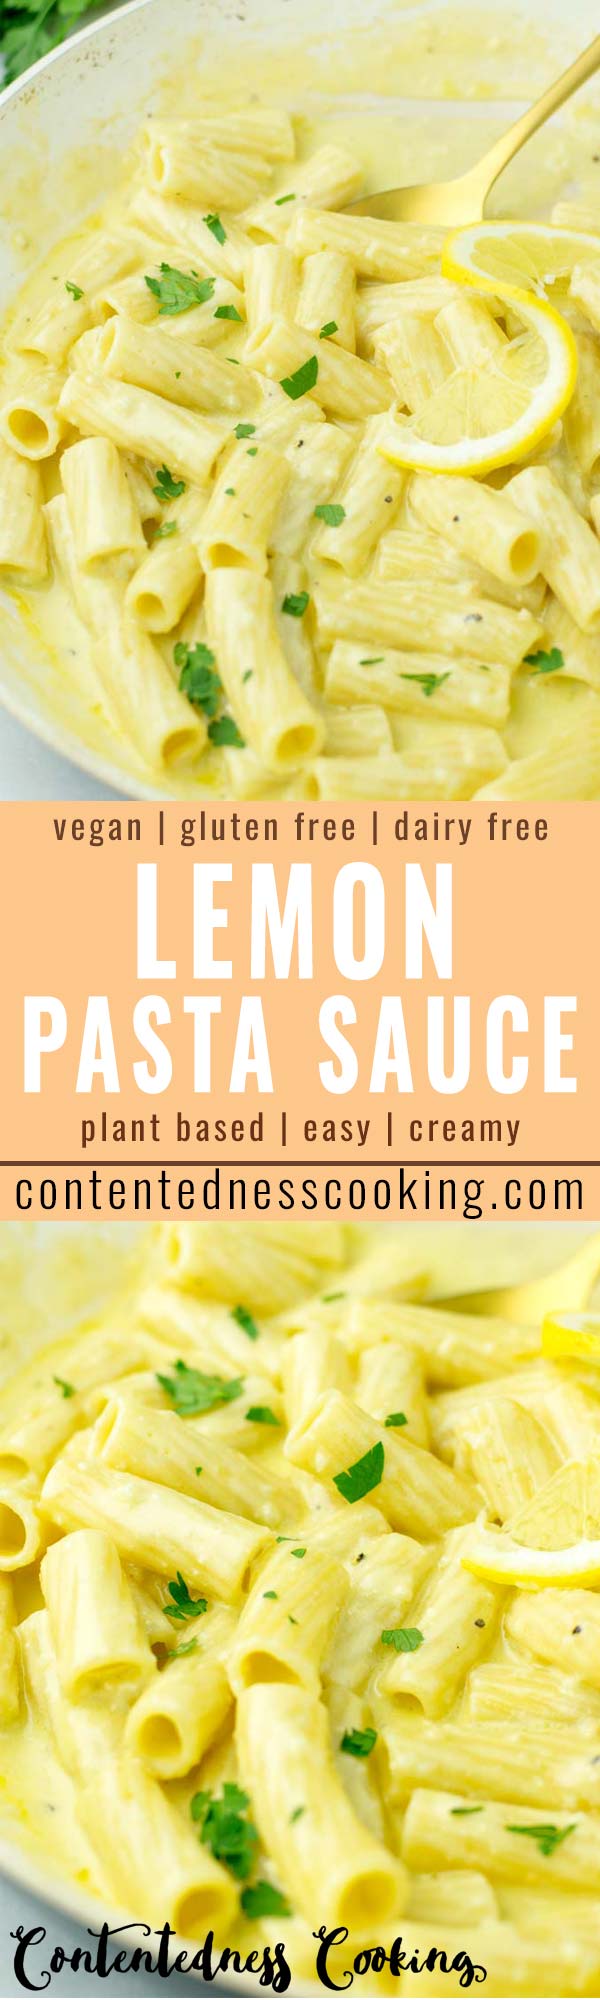 This Lemon Pasta sauce is super easy to make and seriously so delicious! So amazing over your favorite pasta and no one would guess it is vegan, dairy free and even gluten free. Delicious for lunch, dinner, mealprep that the whole family will love including picky kids! #vegan #dairyfree #glutenfree #contentednesscooking #vegetarian #lemonpasta #lemonpasta #mealprep #comfortfood #kidsmeals #familydinner 